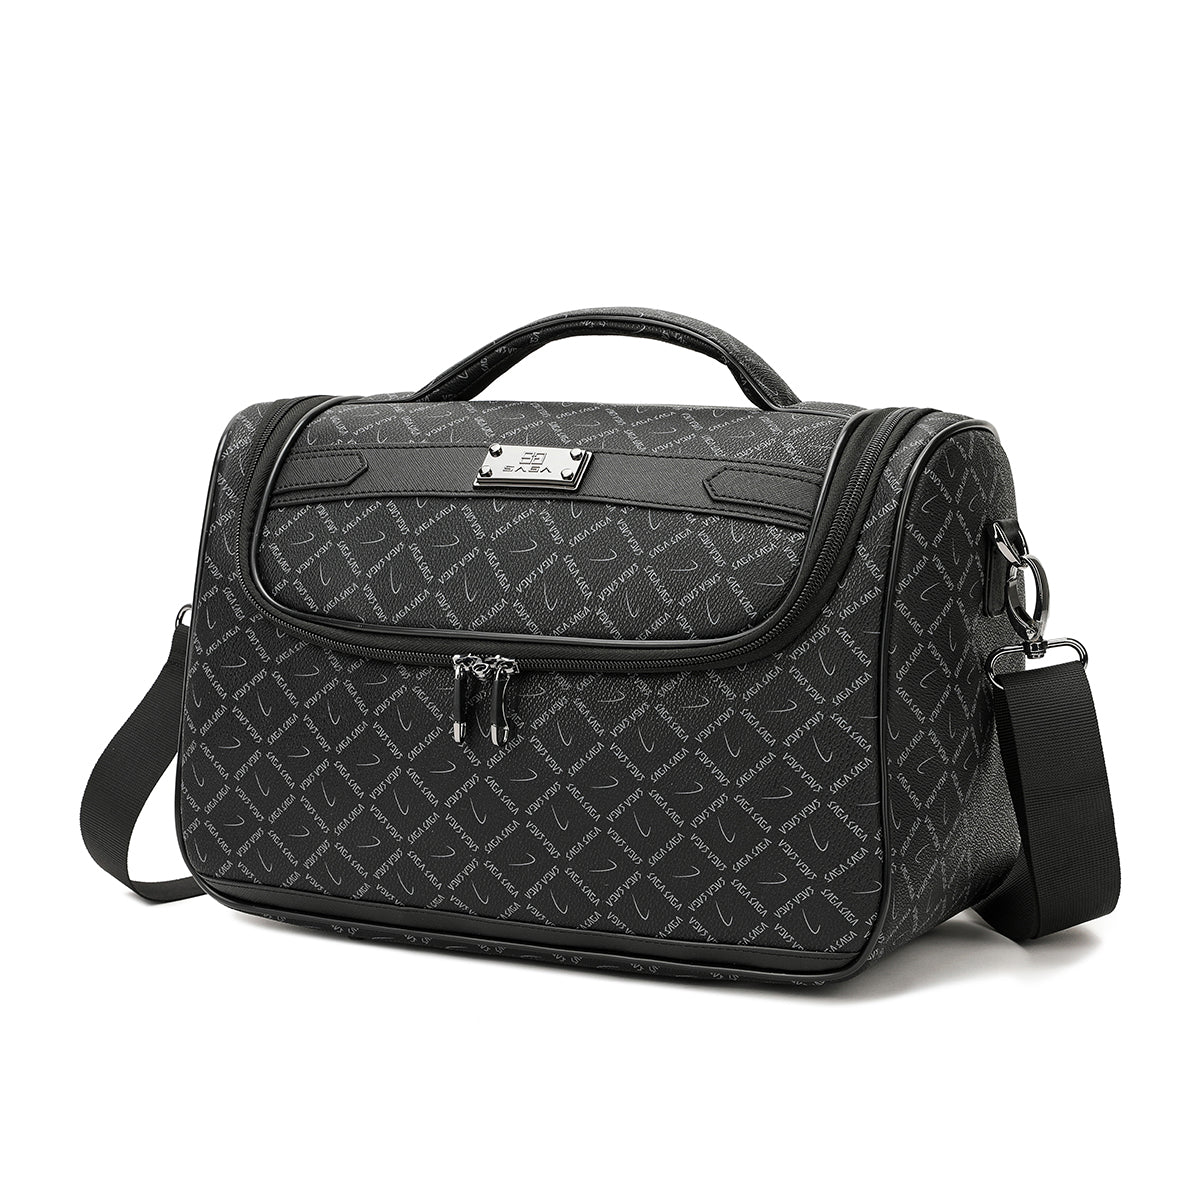 Travel bag 13 inch with shoulder strap for airplane, gray color